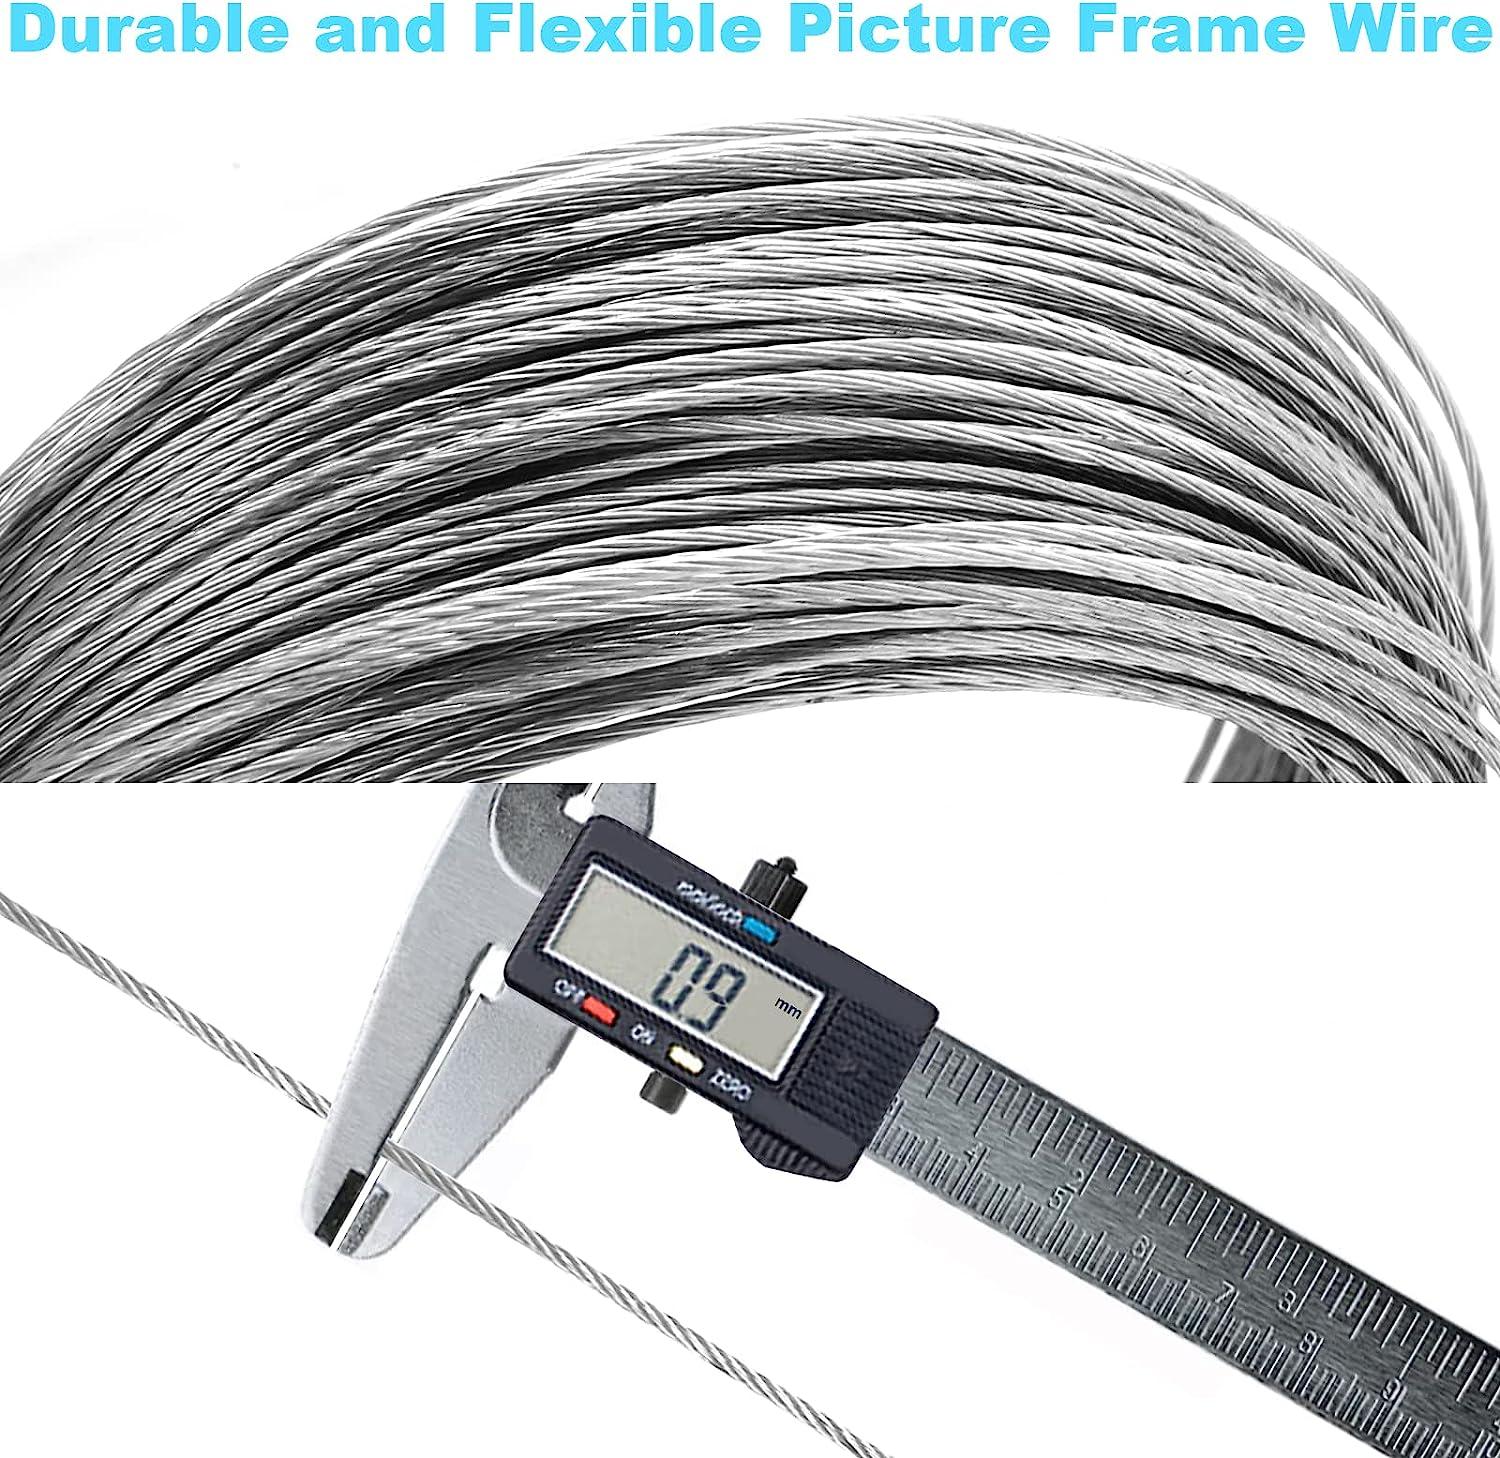 AccEncyc 100ft picture hanging wire 30lb braided picture wire for photos,  frame, picture wire for artwork